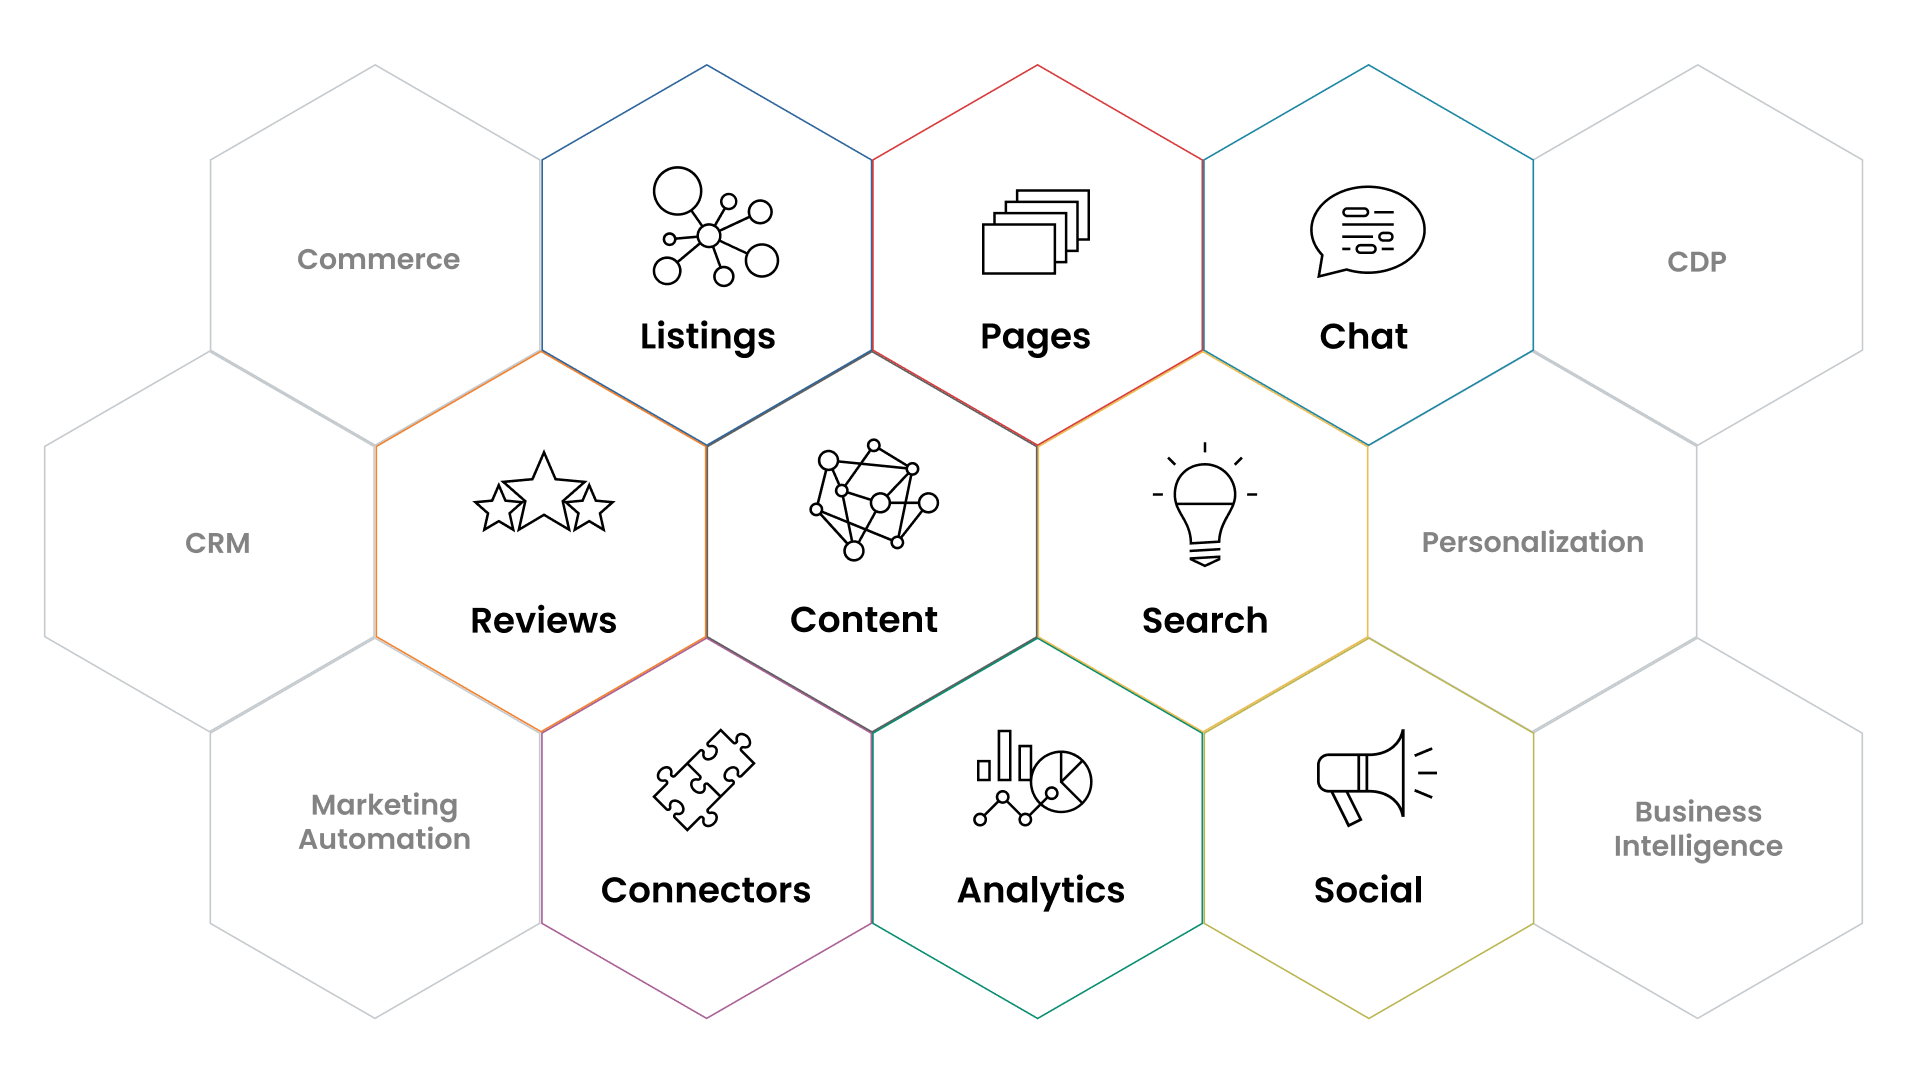 Graphic listing the name of the components that make up The Answers Platform - Pages, Listings, Content, Search, Analytics, Connectors, Reviews